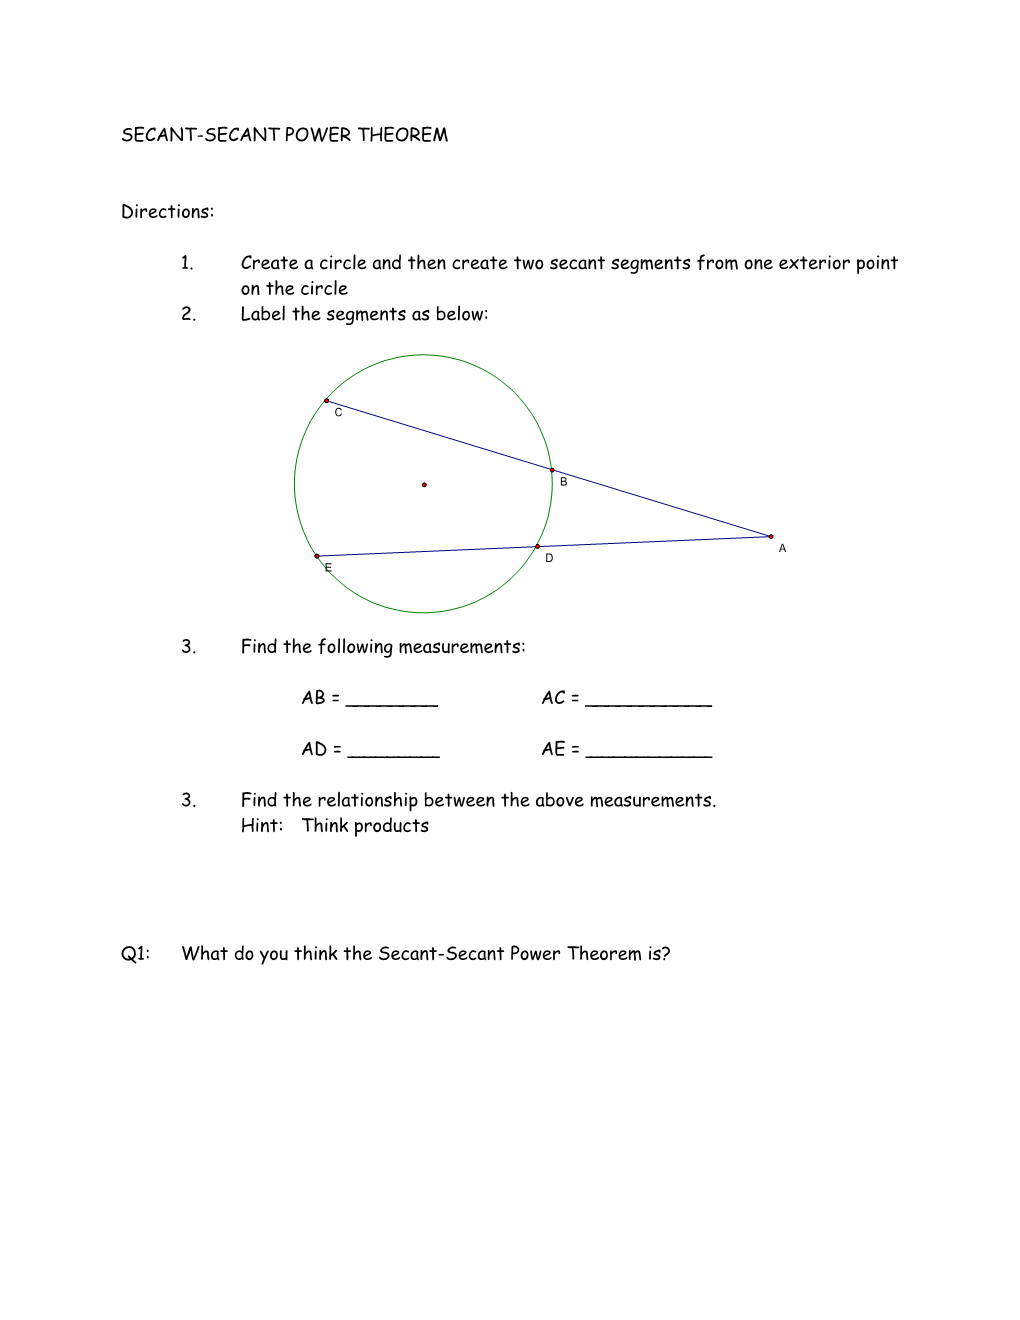 GEOMETRY a Geosketchpad Power Theorem Project